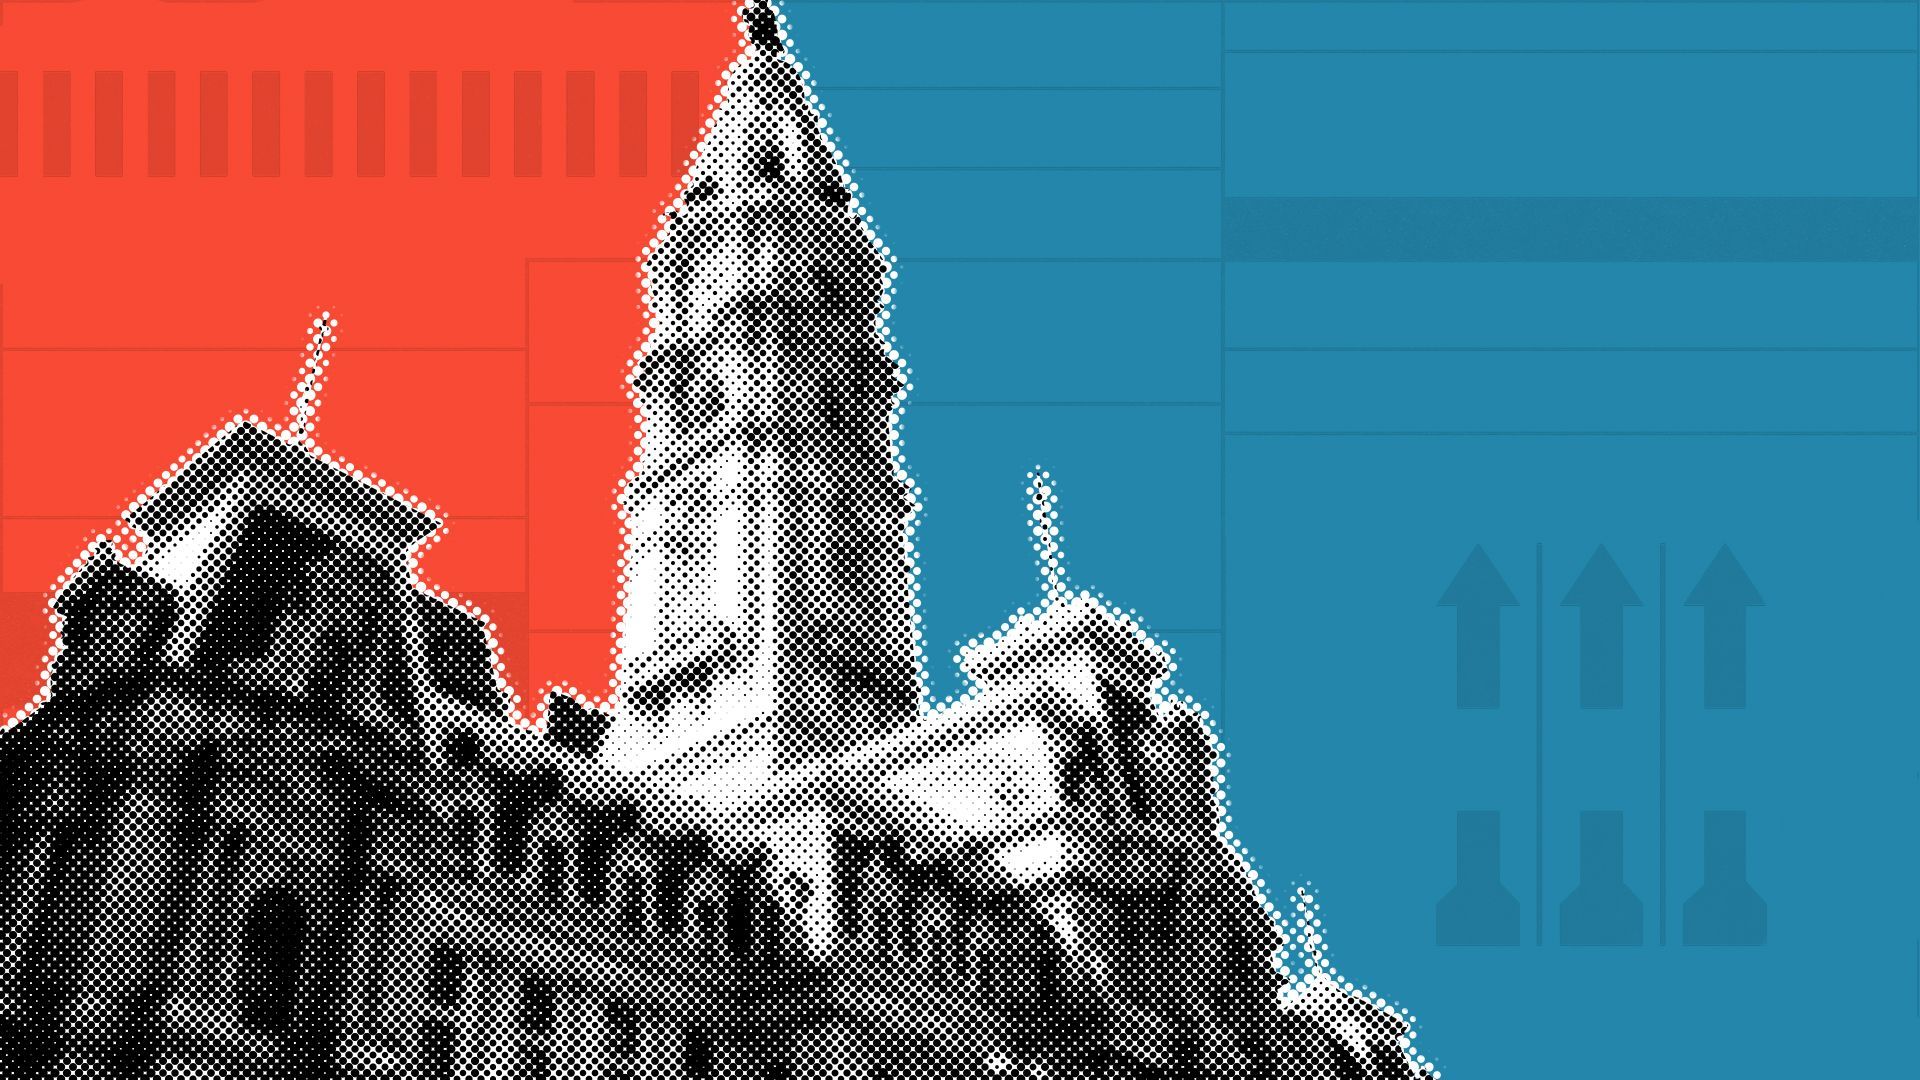 Illustration of Philadelphia city hall over a divided red and blue background with elements of ballots.